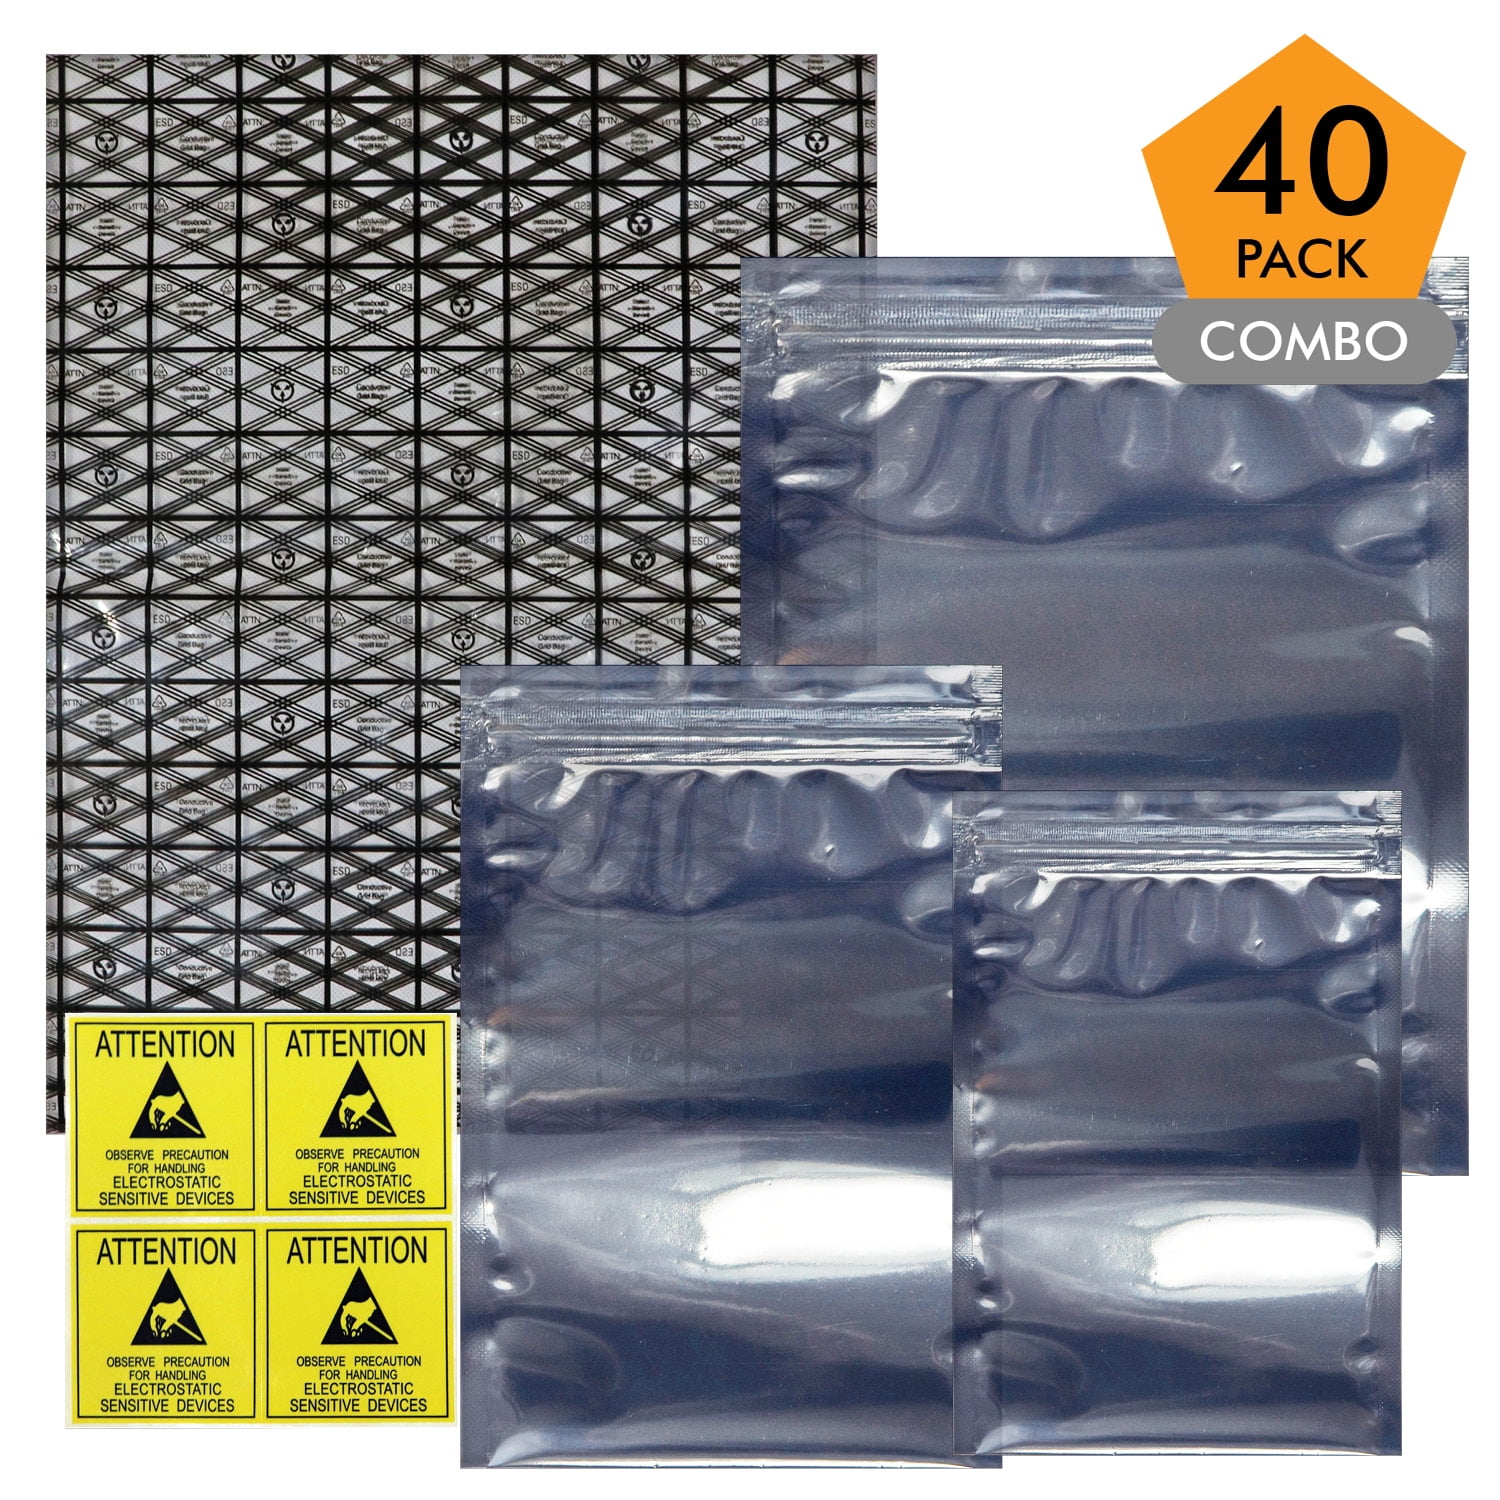 Anti Static Bags 30pcs Small Antistatic Resealable ESD Bag for 3.5 Hard  Drive 2.5 Solid State Drive ESD Shielding Storage Zipper HDD Bags for  Electronics Devices (30pcs Mixed Sizes) 